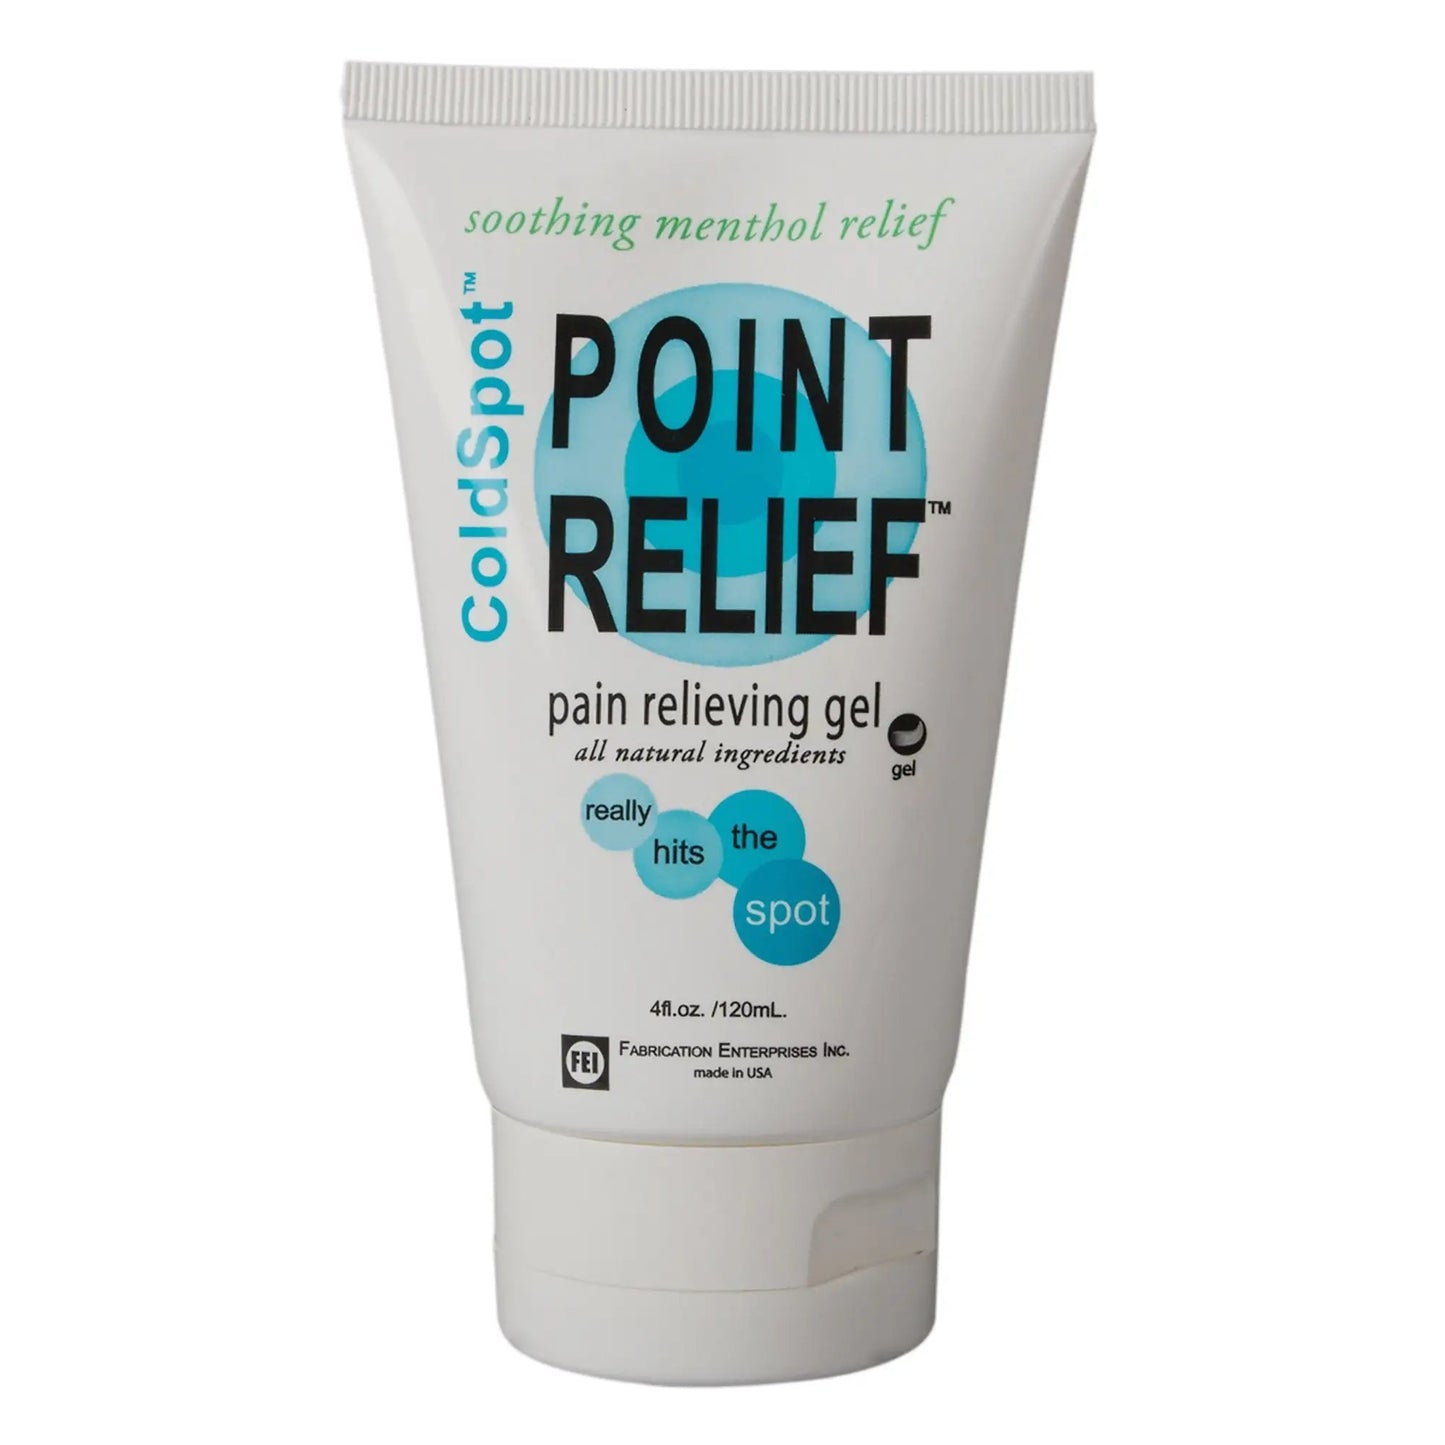 Point Relief ColdSpot Topical Pain Relief, 8 oz. Tube